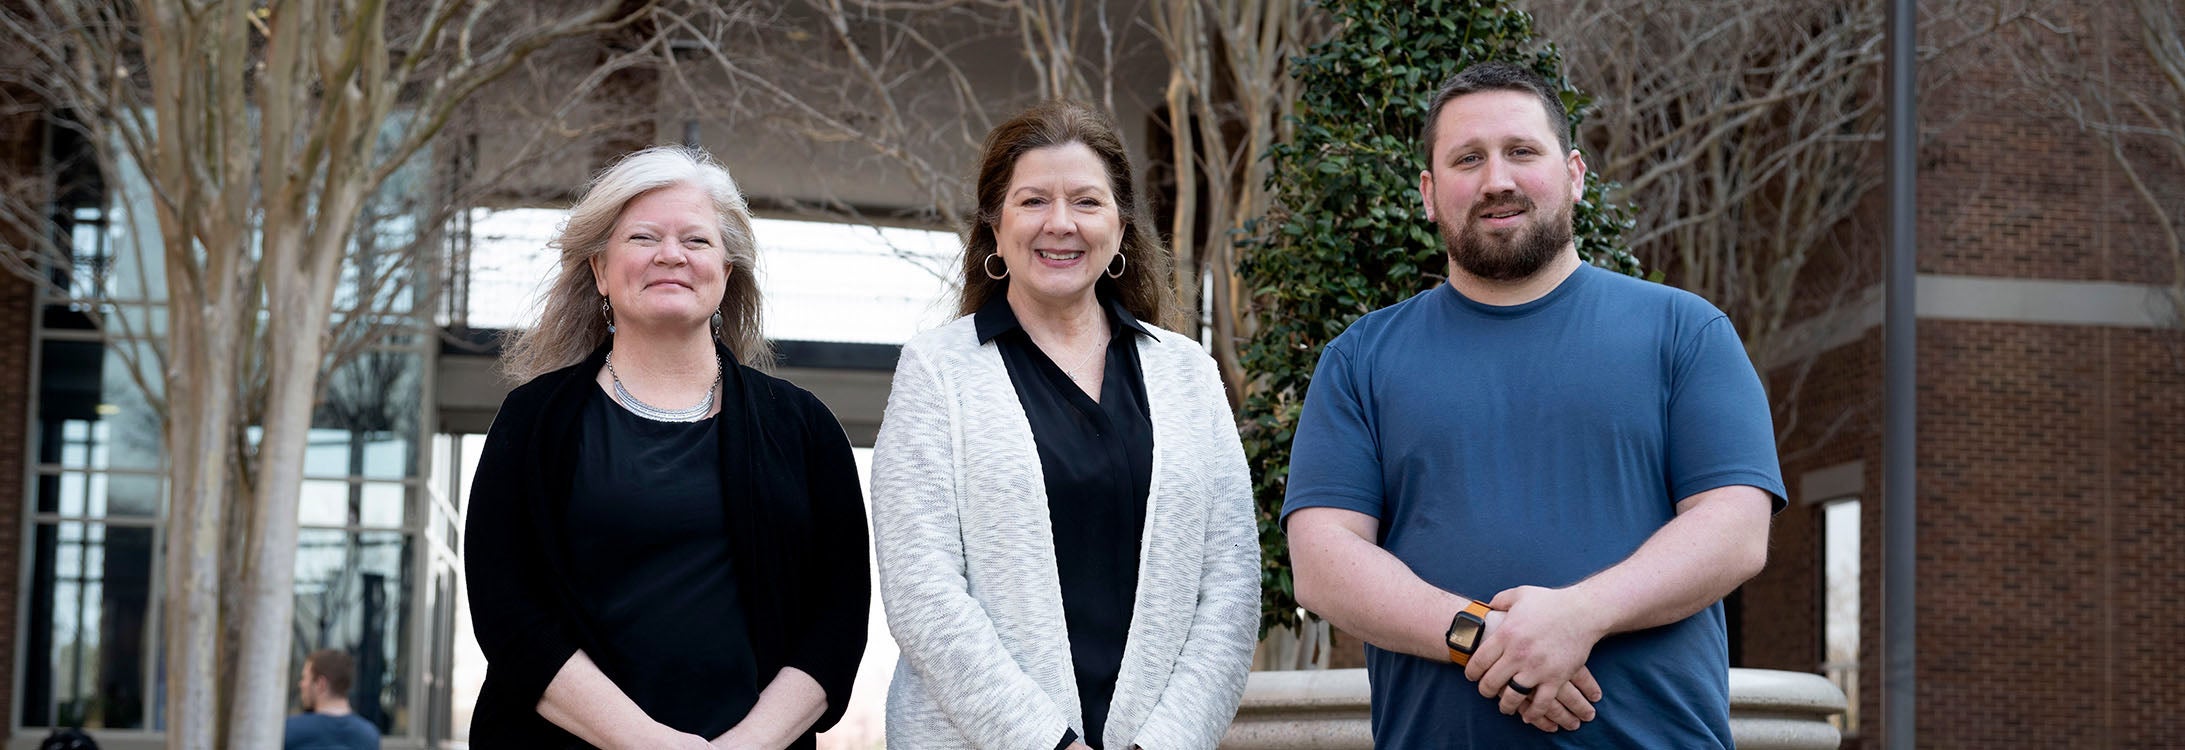 The East Carolina University College of Nursing’s Courtney Caiola, Becky Bagley, and John Smoot played a pivotal role in helping a nursing student care for her newly adopted child.